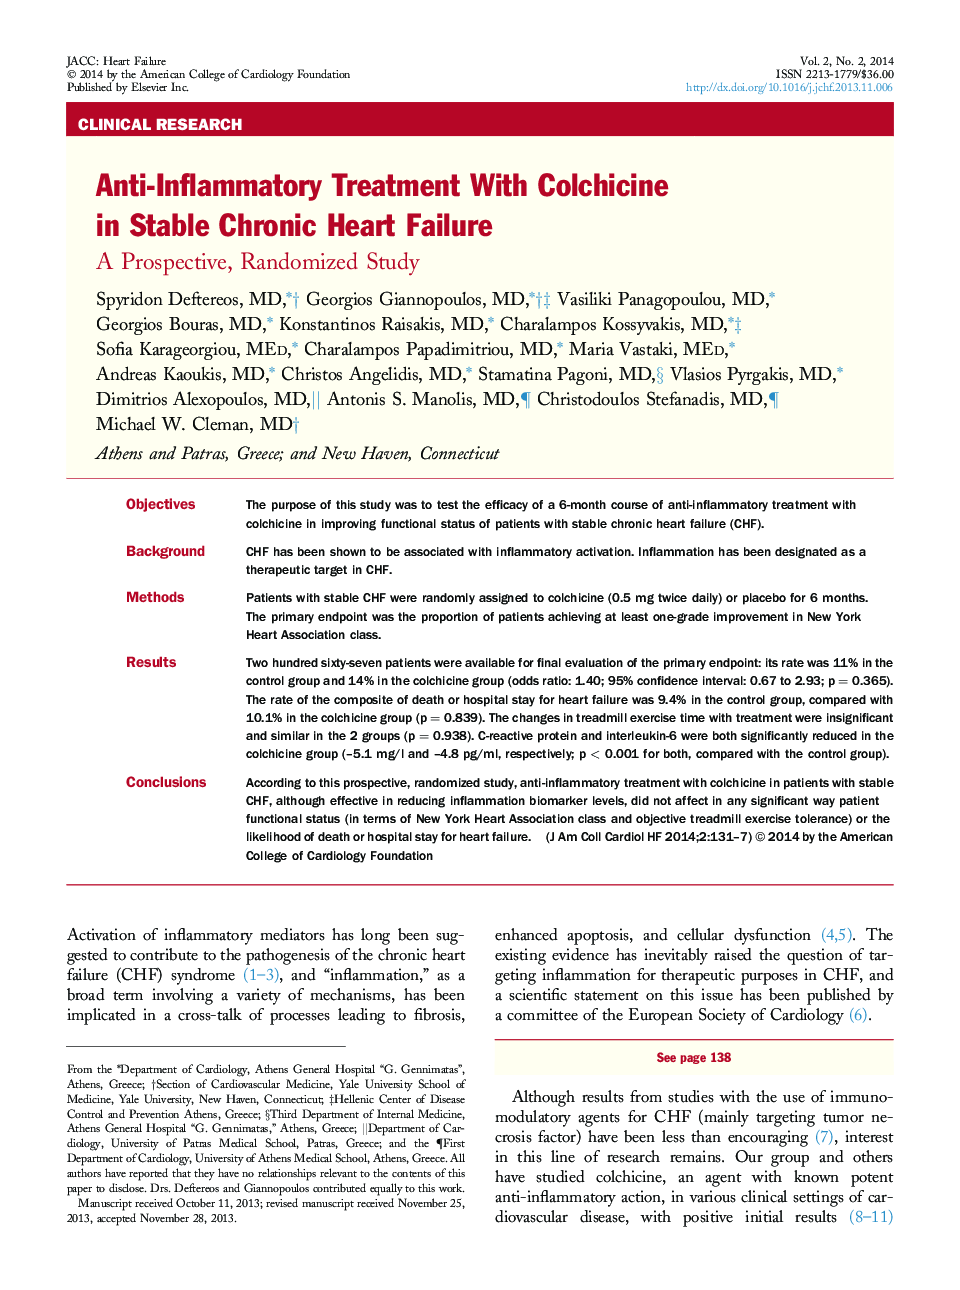 Anti-Inflammatory Treatment With Colchicine in Stable Chronic Heart Failure : A Prospective, Randomized Study